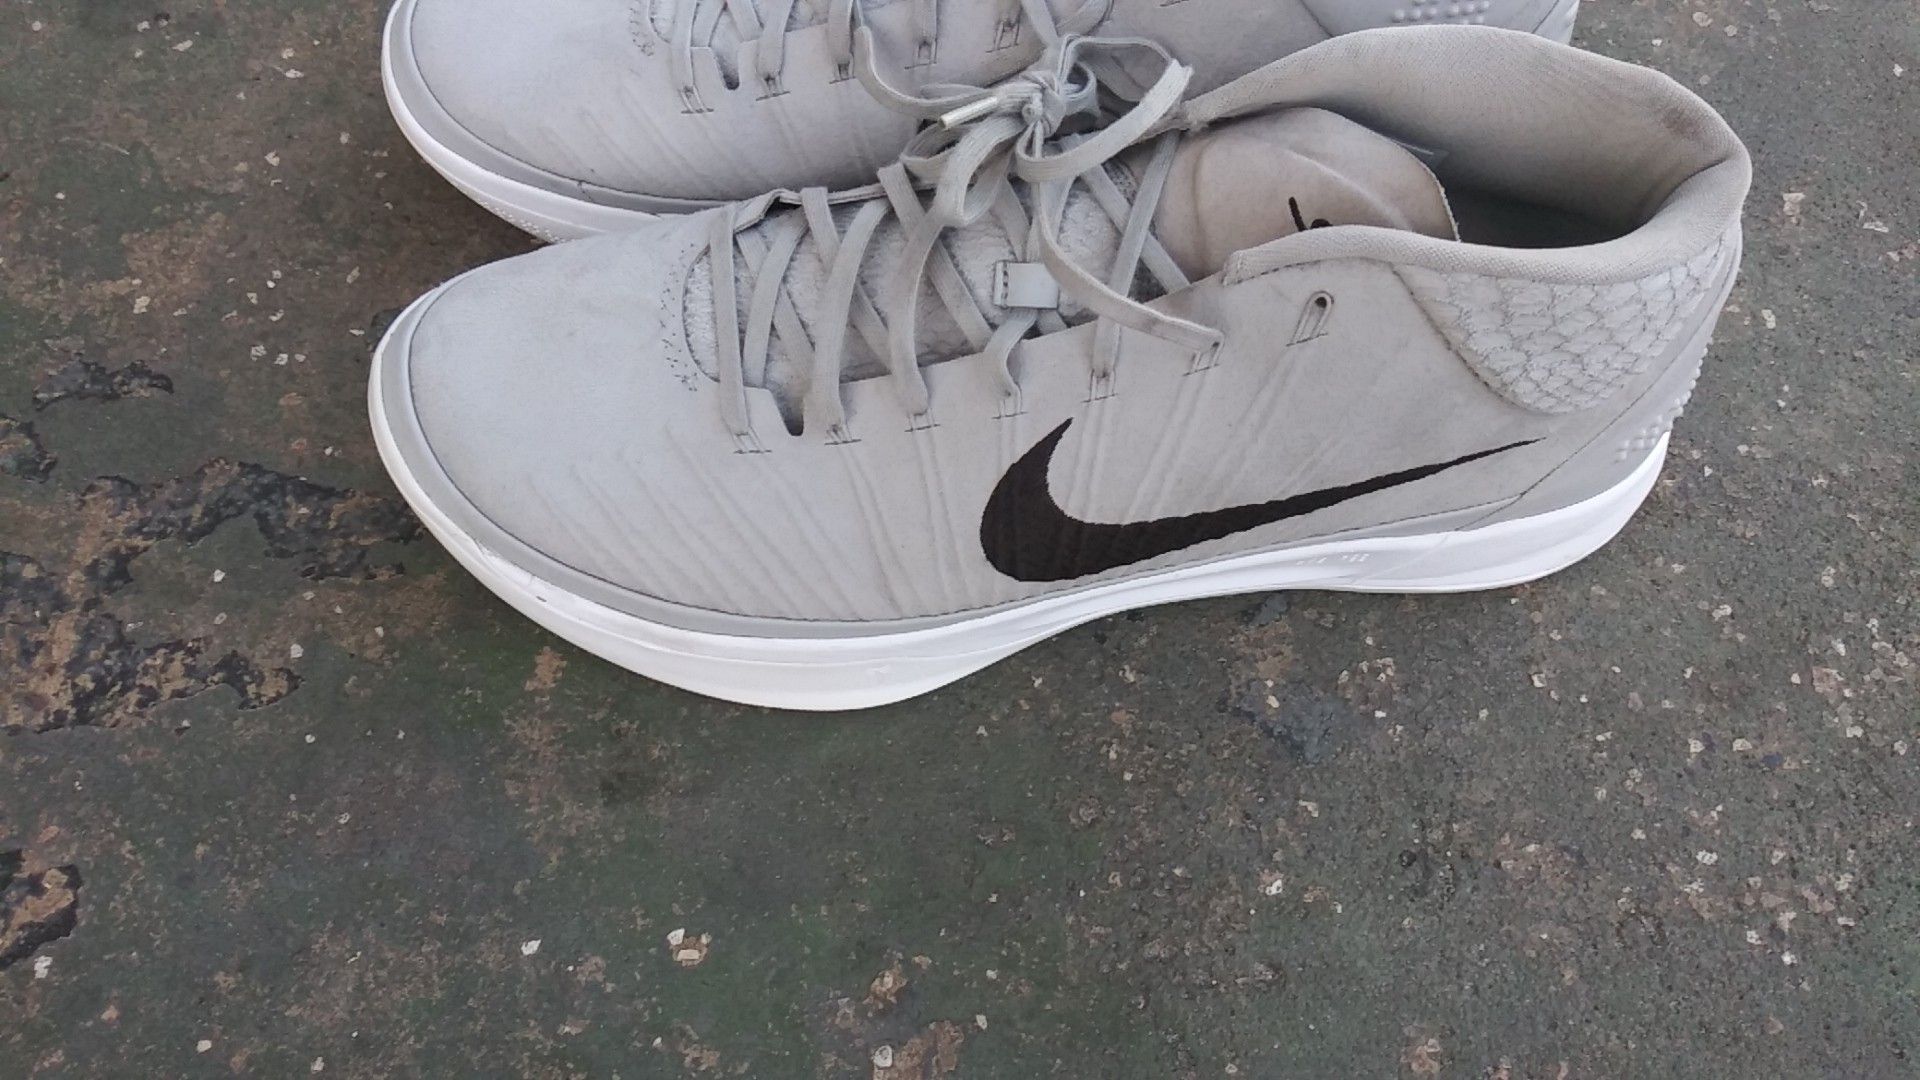 Nike worn once size 16